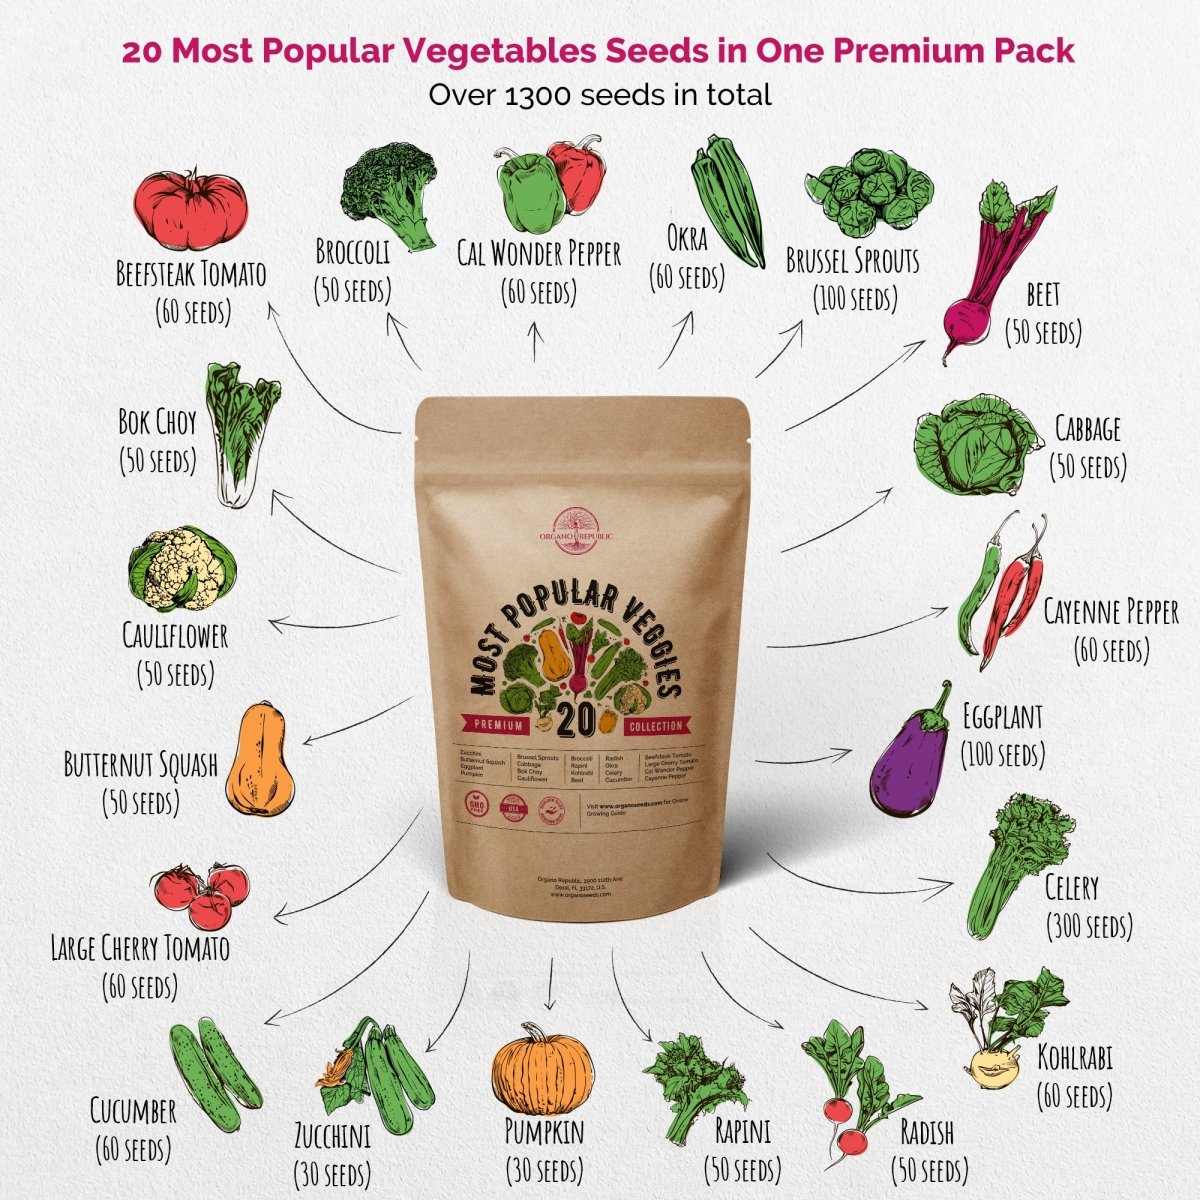 20 Most Popular Vegetable Seeds Variety Pack - Over 1300 Non-Gmo, Heirloom Seeds - Organo Republic